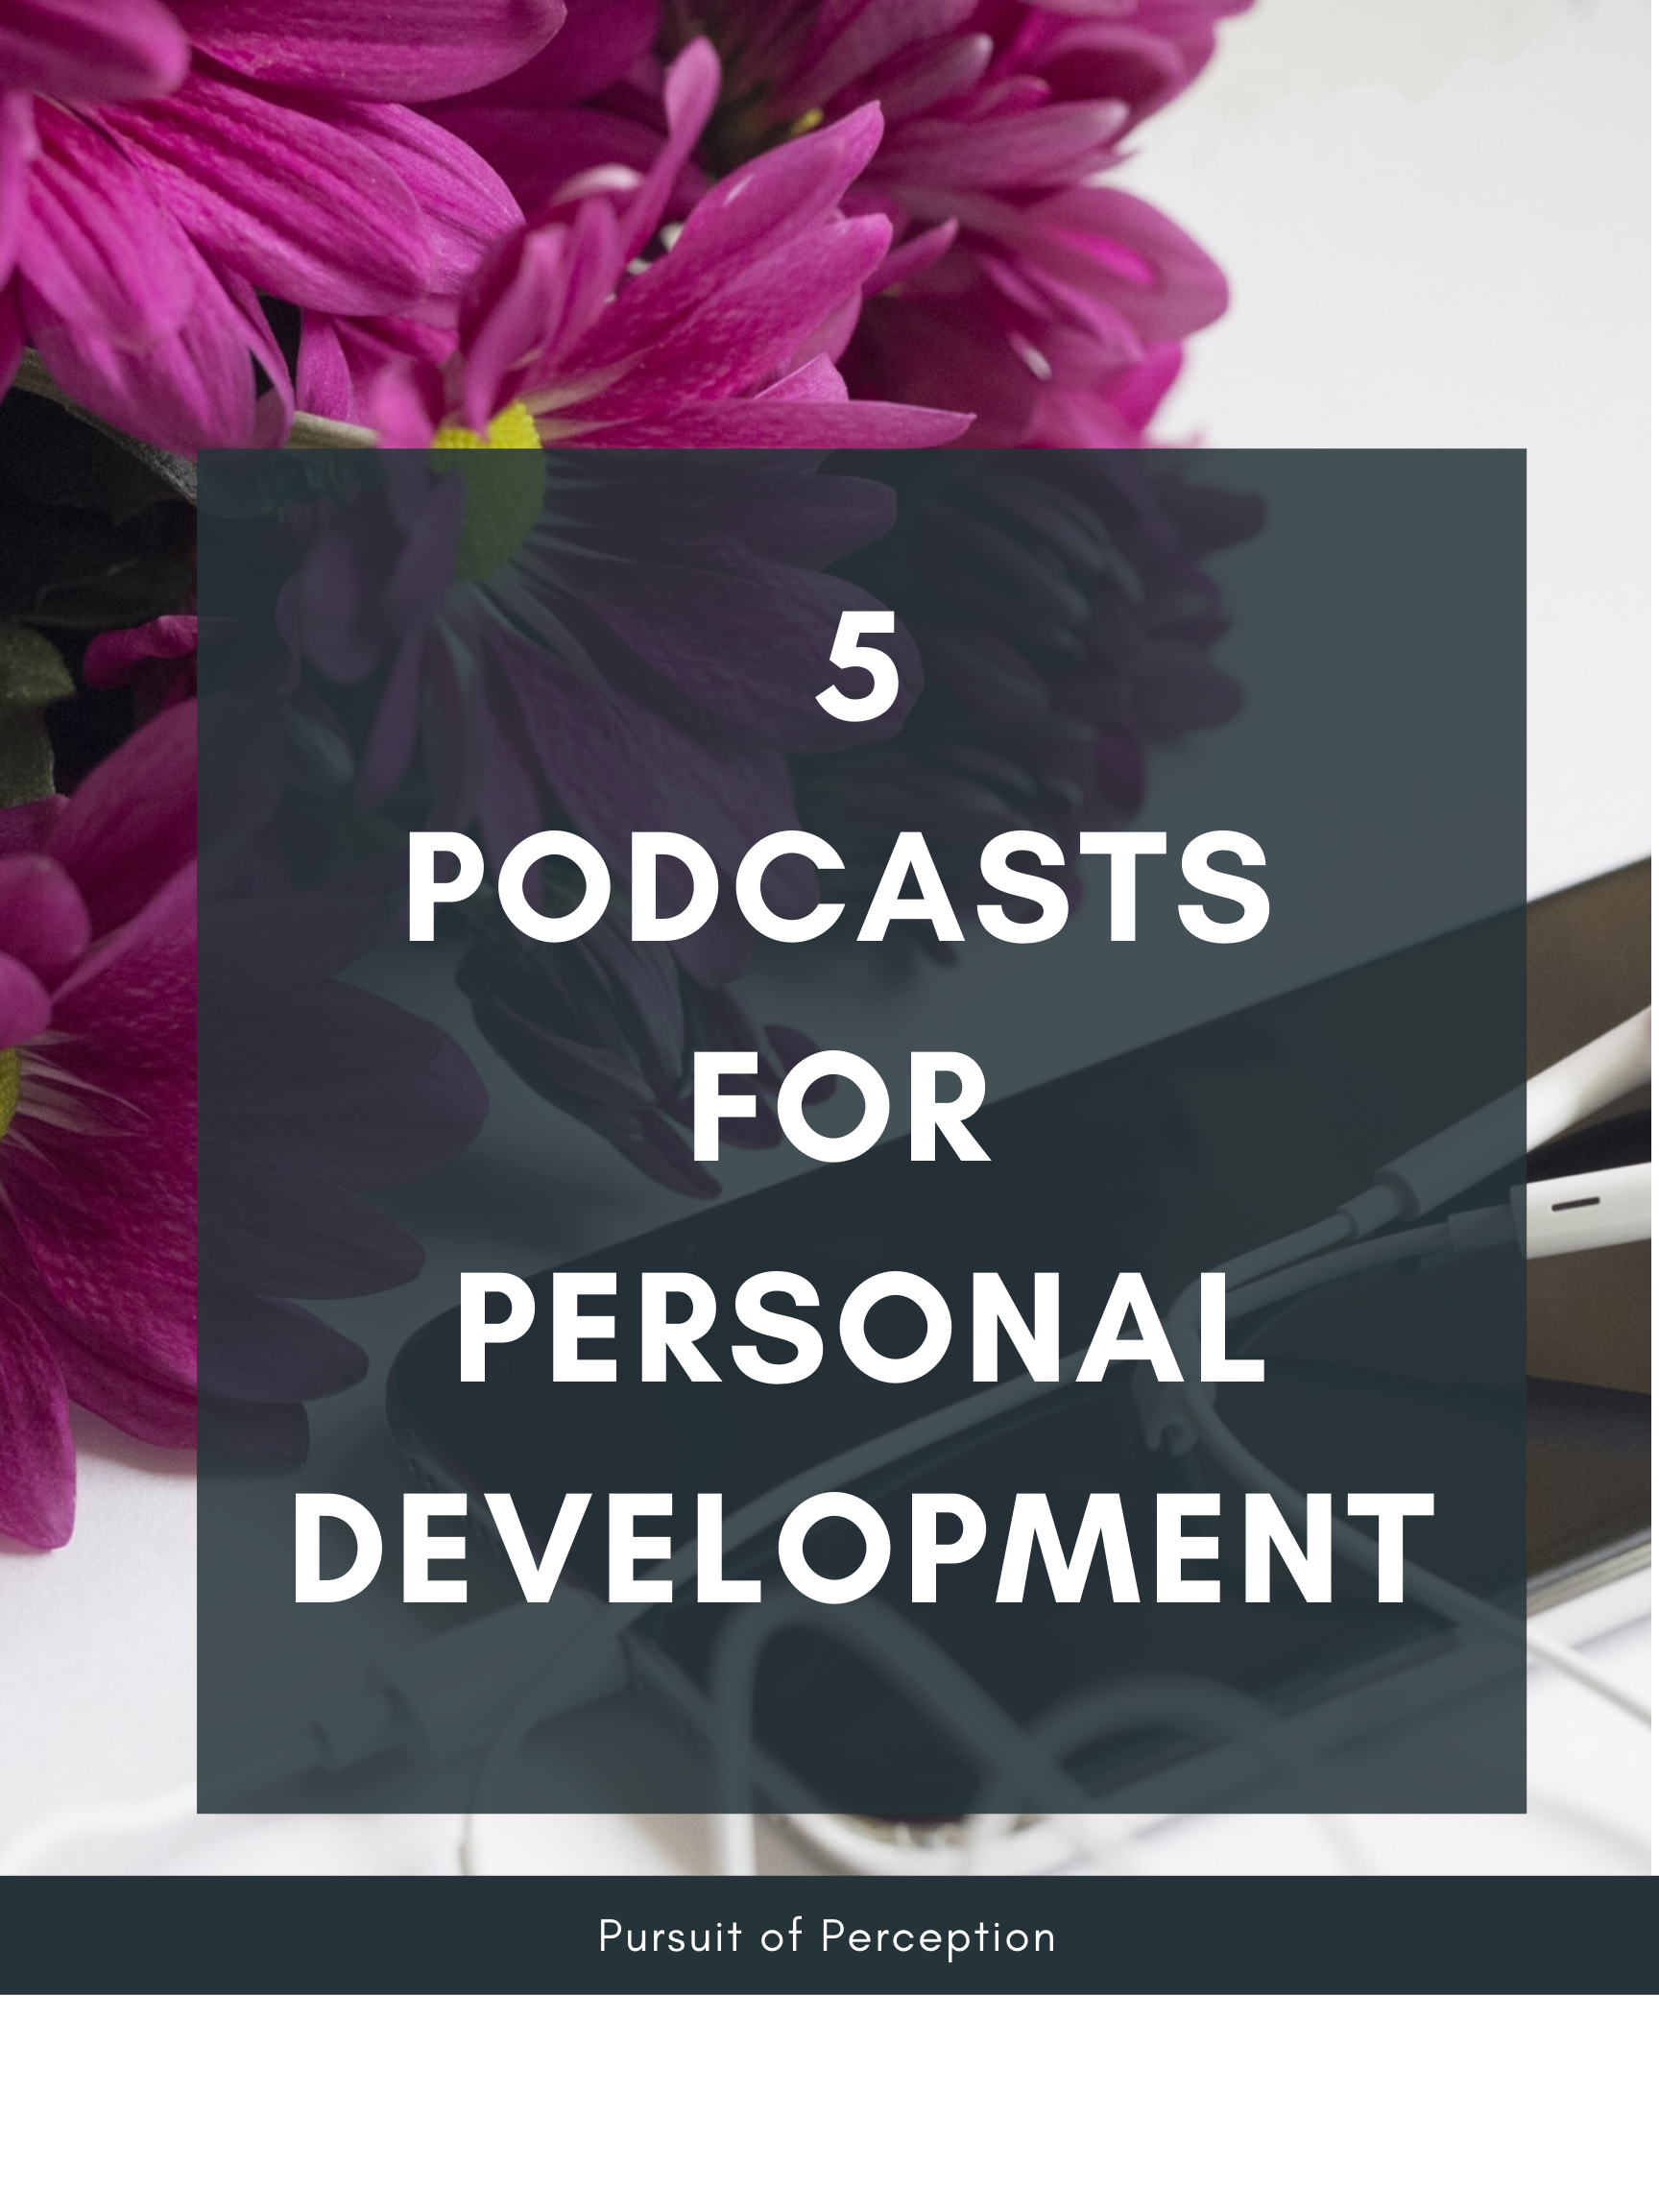 5 Podcasts For Personal Development